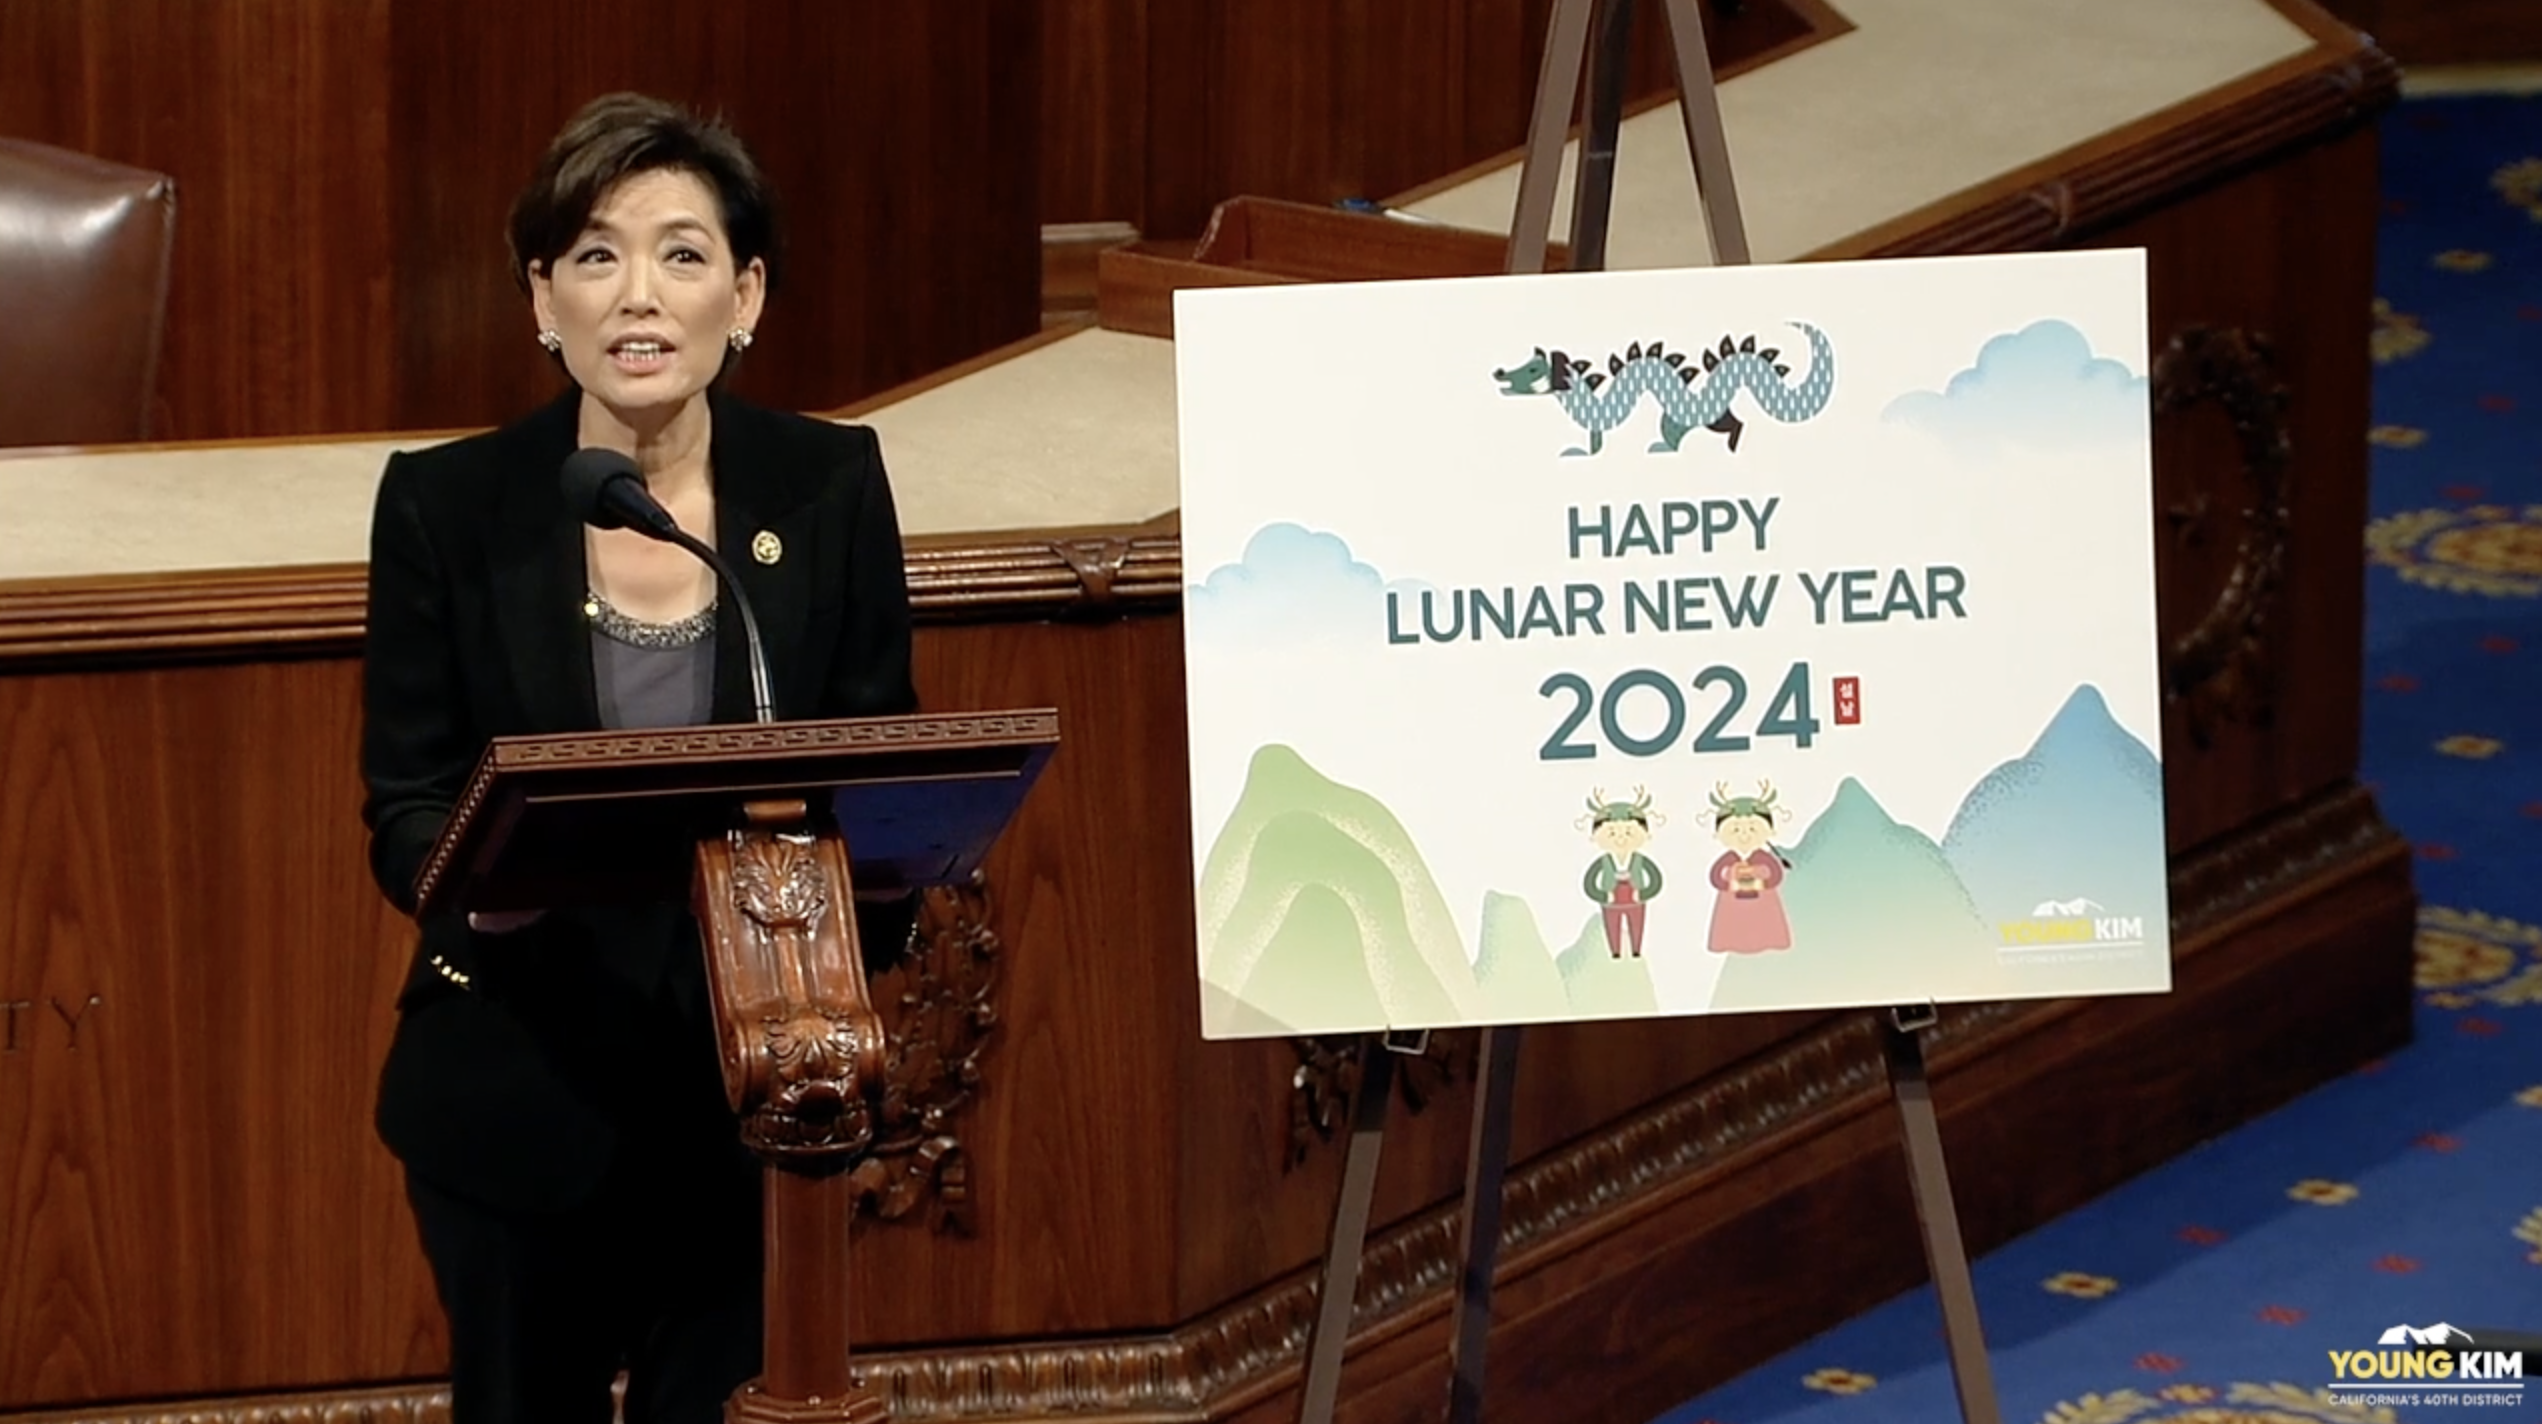 Rep. Young Kim Honors Lunar New Year